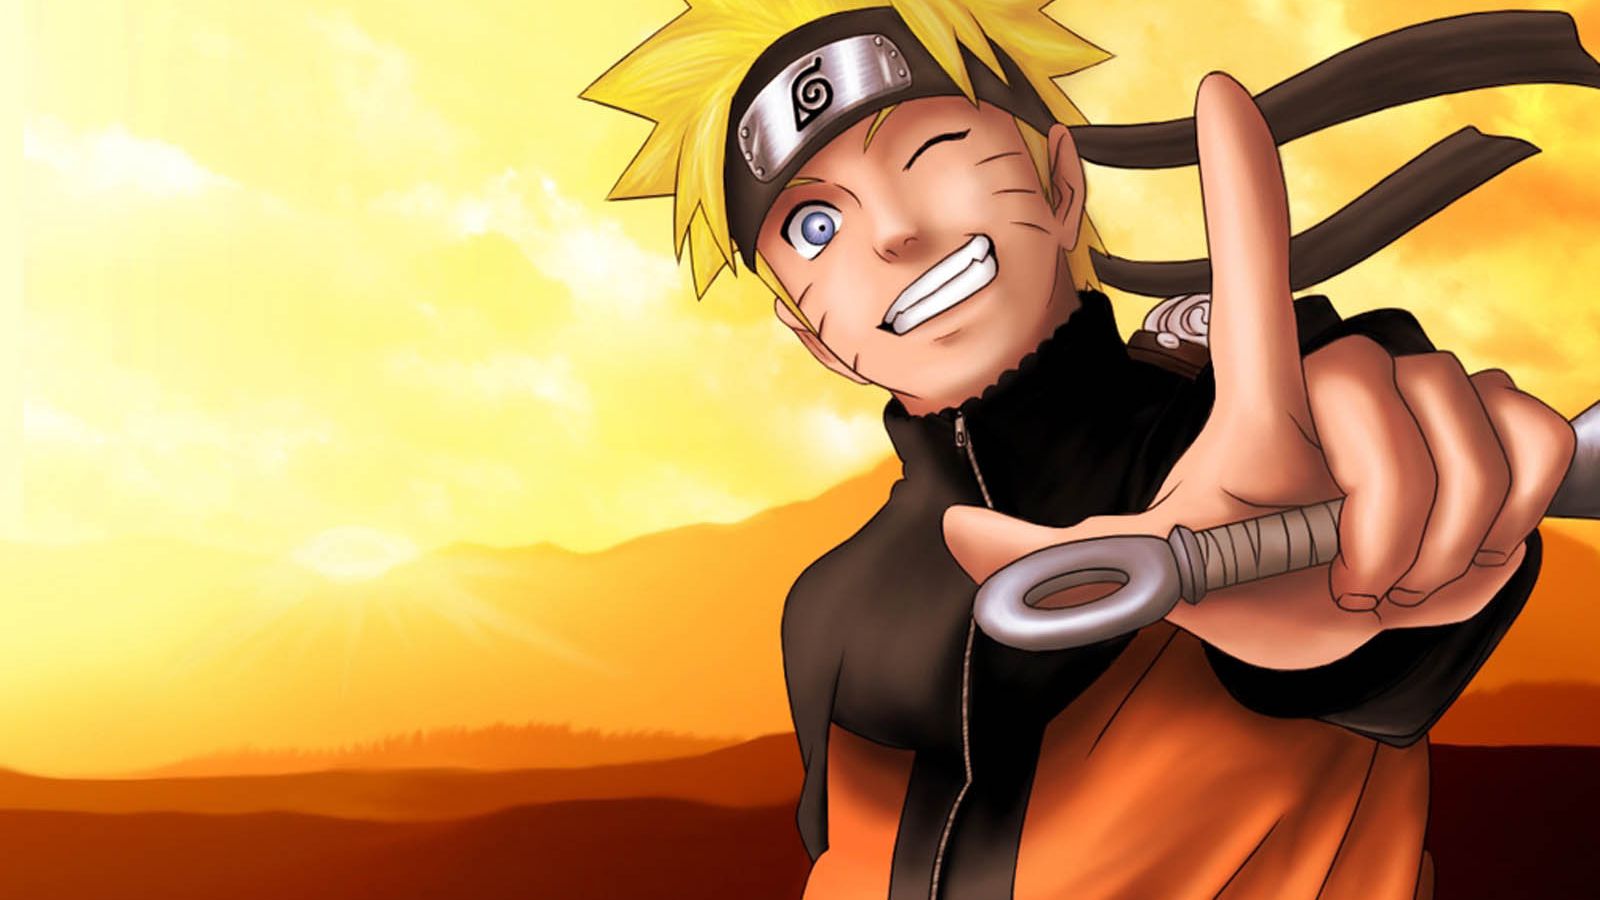 Free download Naruto Shippuden Wallpaper Funny Photo Funny mages [1600x1200] for your Desktop, Mobile & Tablet. Explore Pic Of Naruto Wallpaper. Naruto Best Wallpaper, Naruto Laptop Wallpaper, HD Wallpaper of Naruto